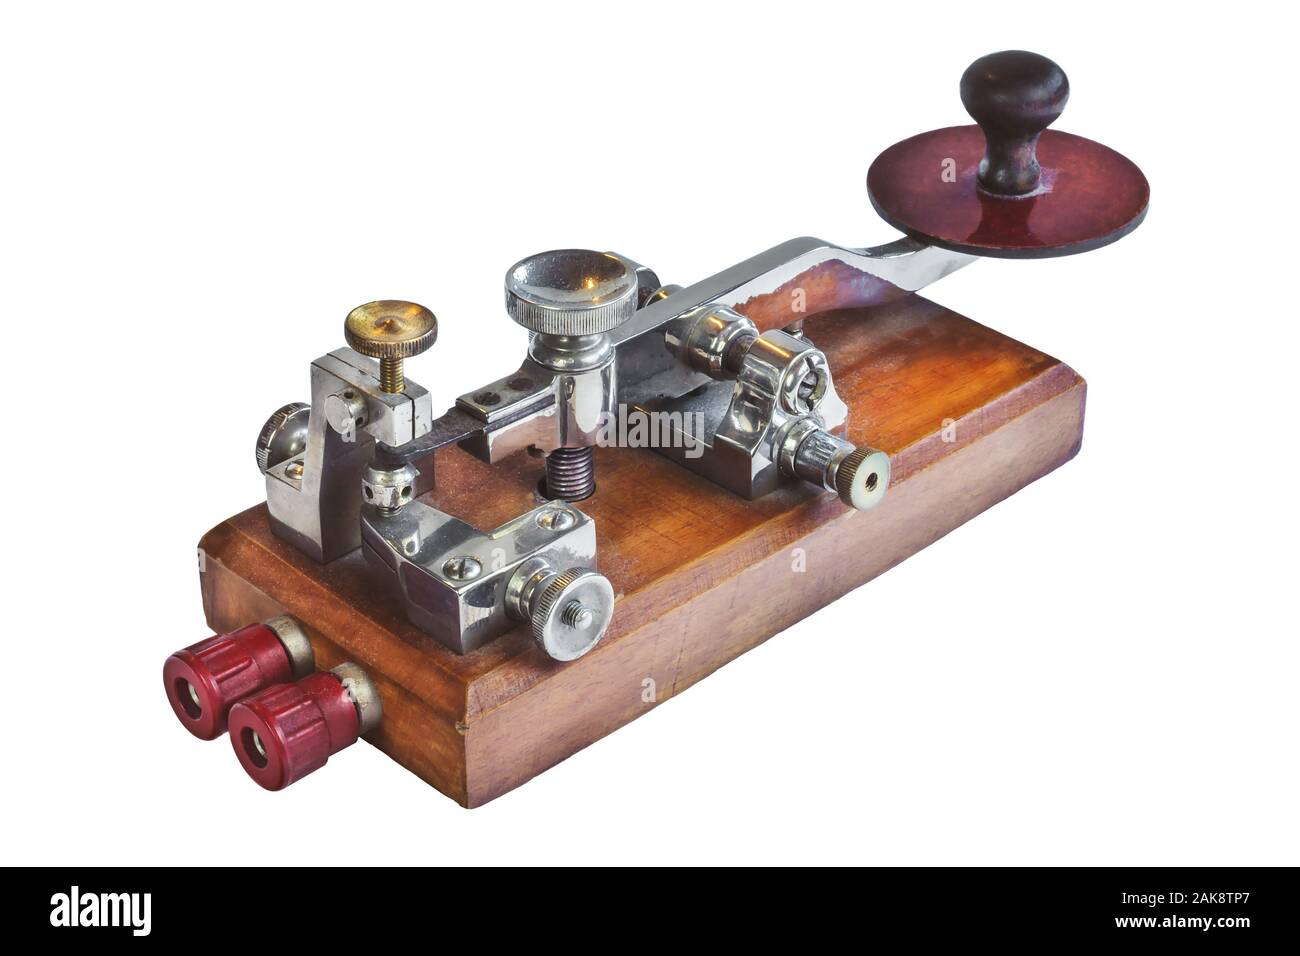 Ancient morse code telegraphy device isolated on a white background Stock Photo